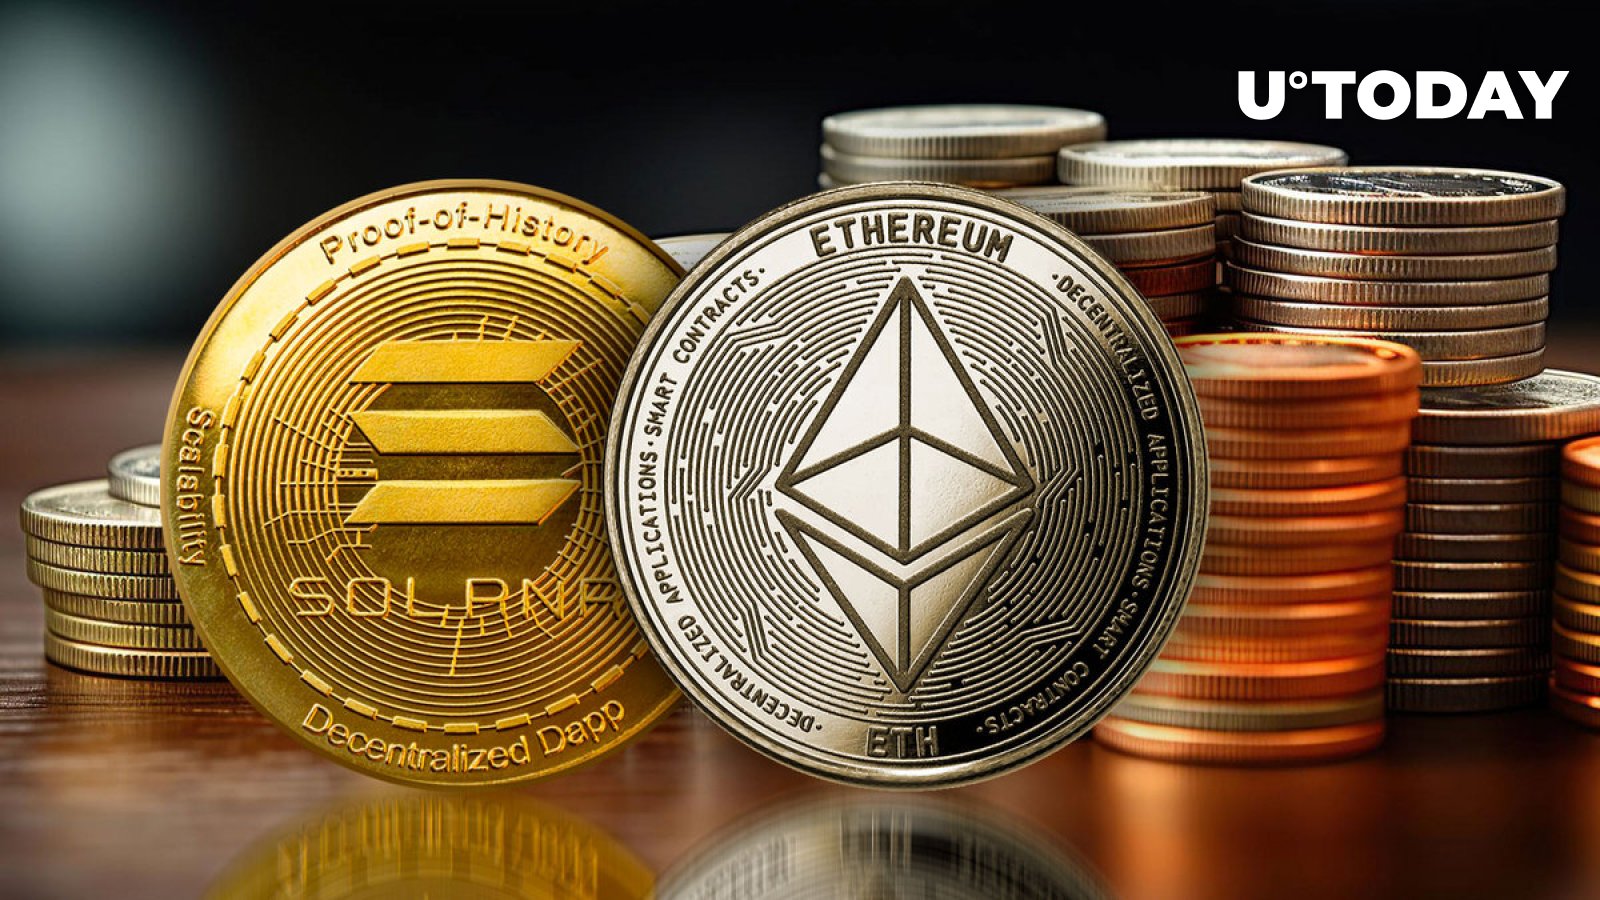 Solana or Ethereum L2s? Crypto Veteran ‘Tired of These Takes’